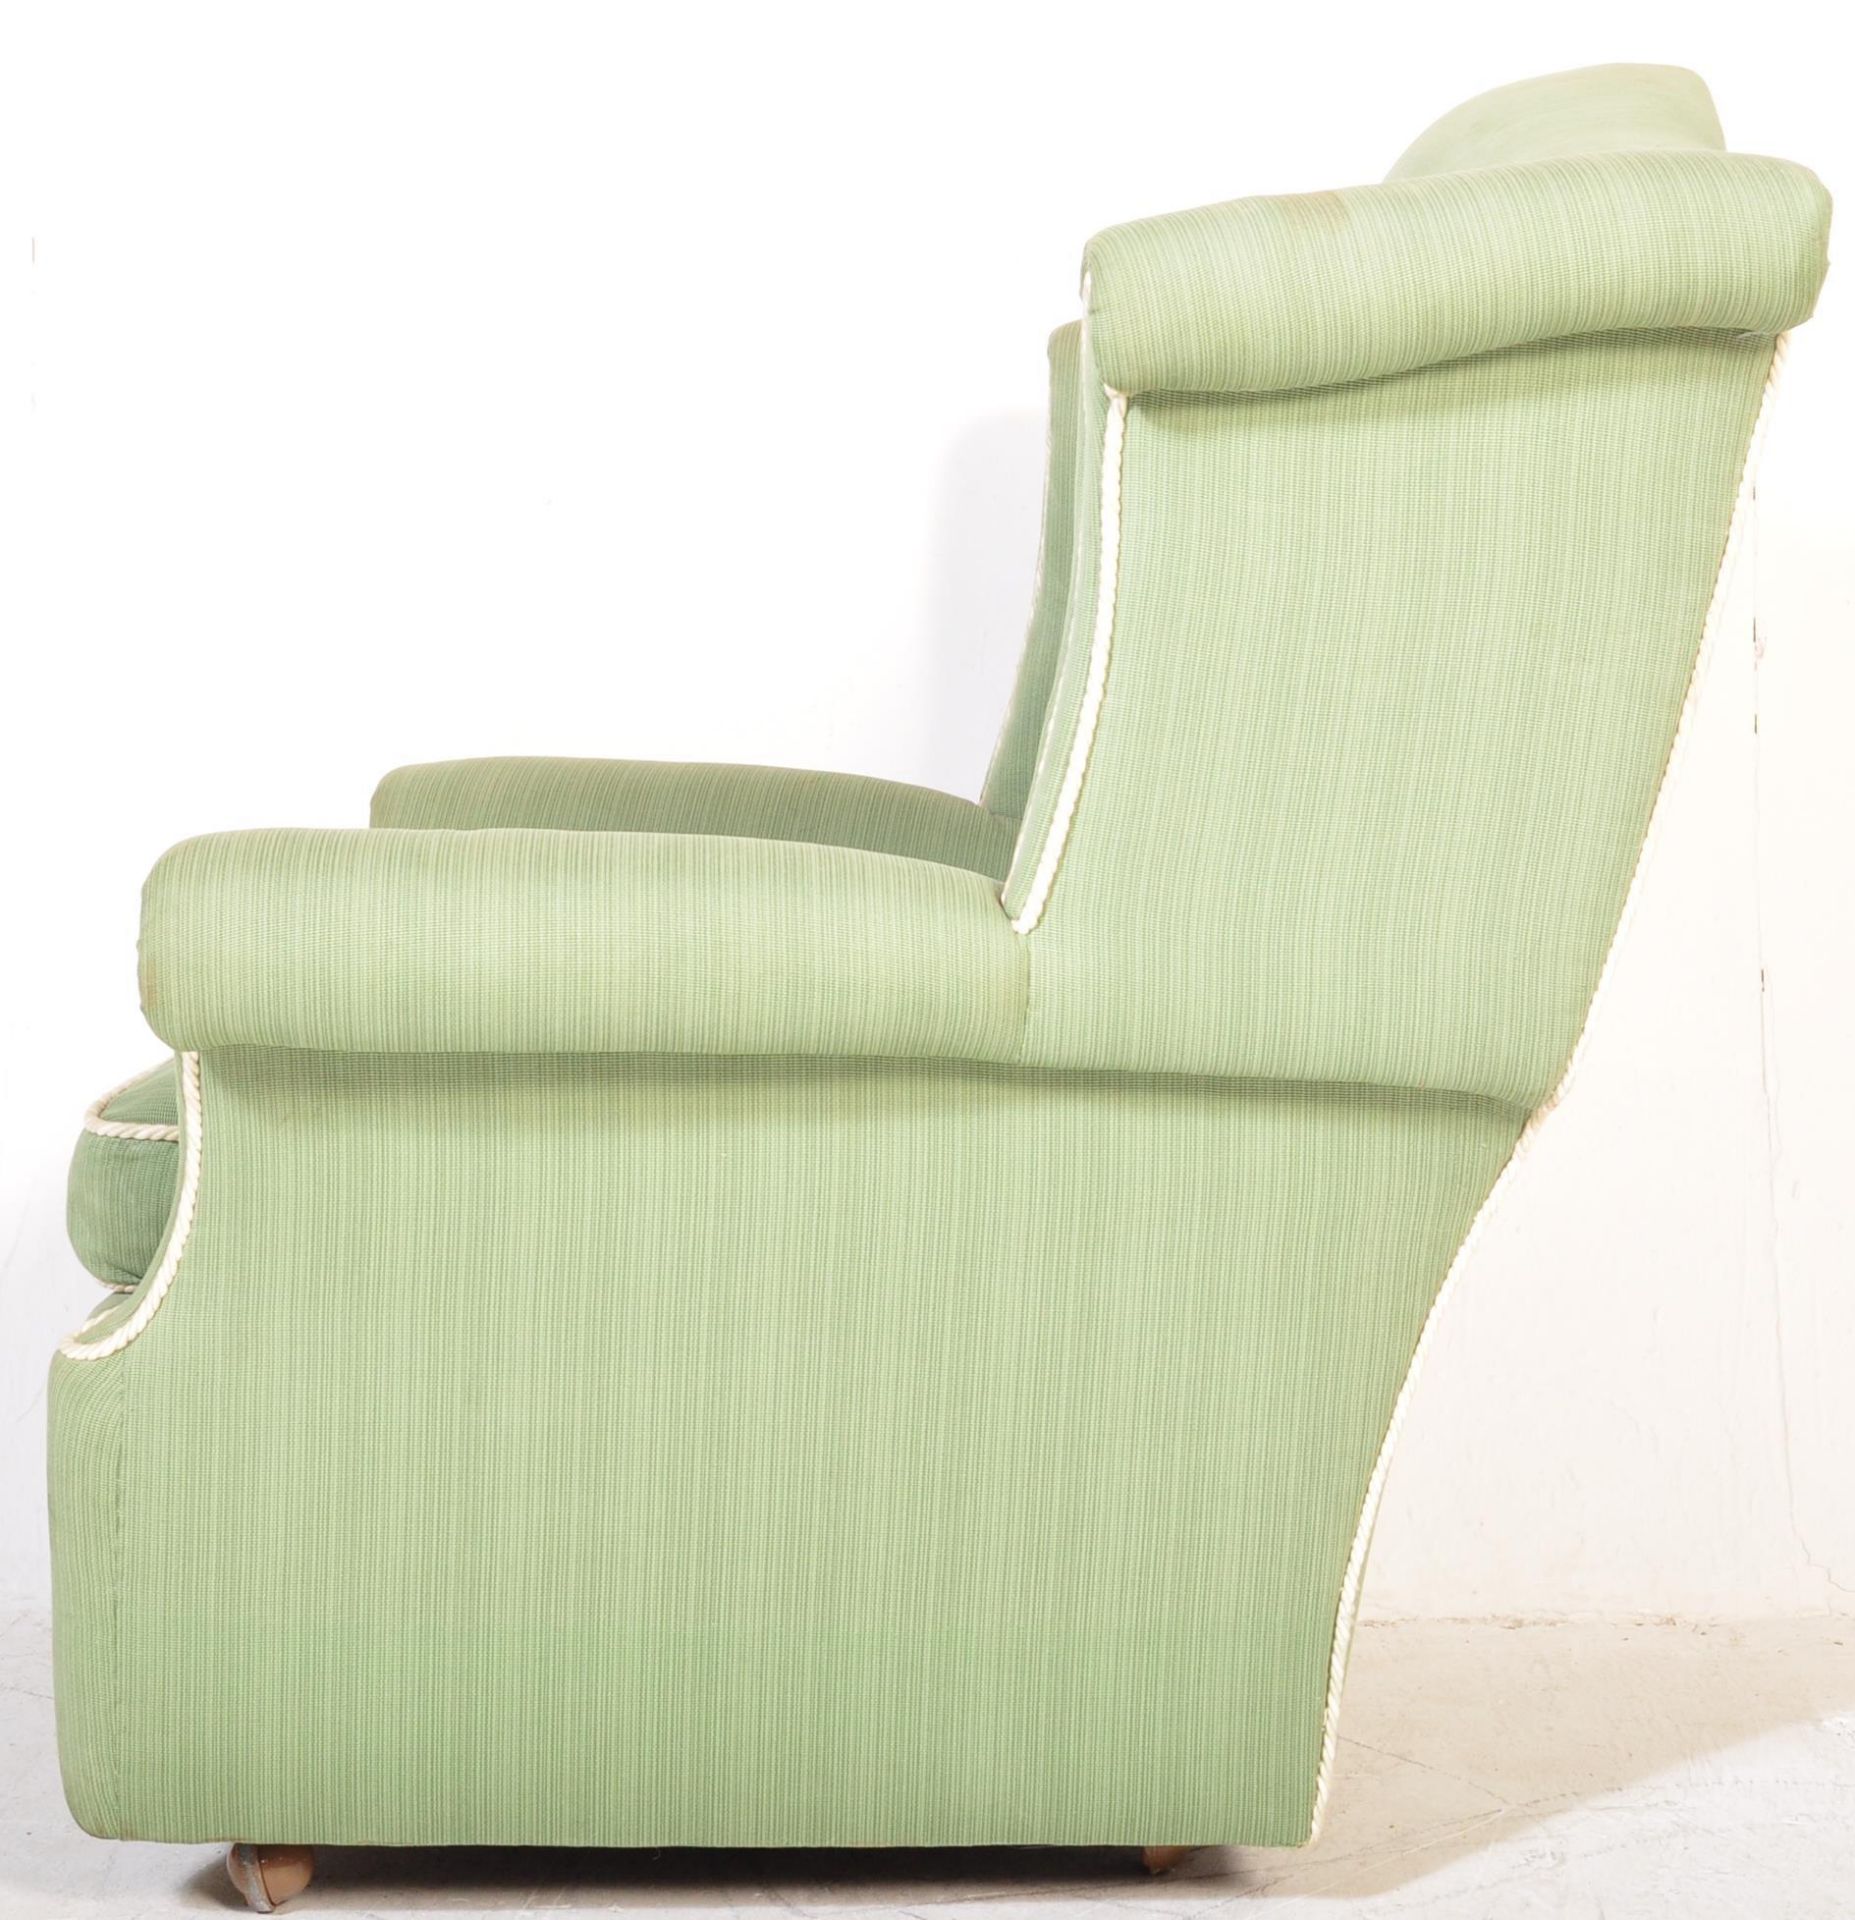 RETRO MID 20TH CENTURY UPHOLSTERED WINGBACK ARMCHAIR - Image 5 of 7